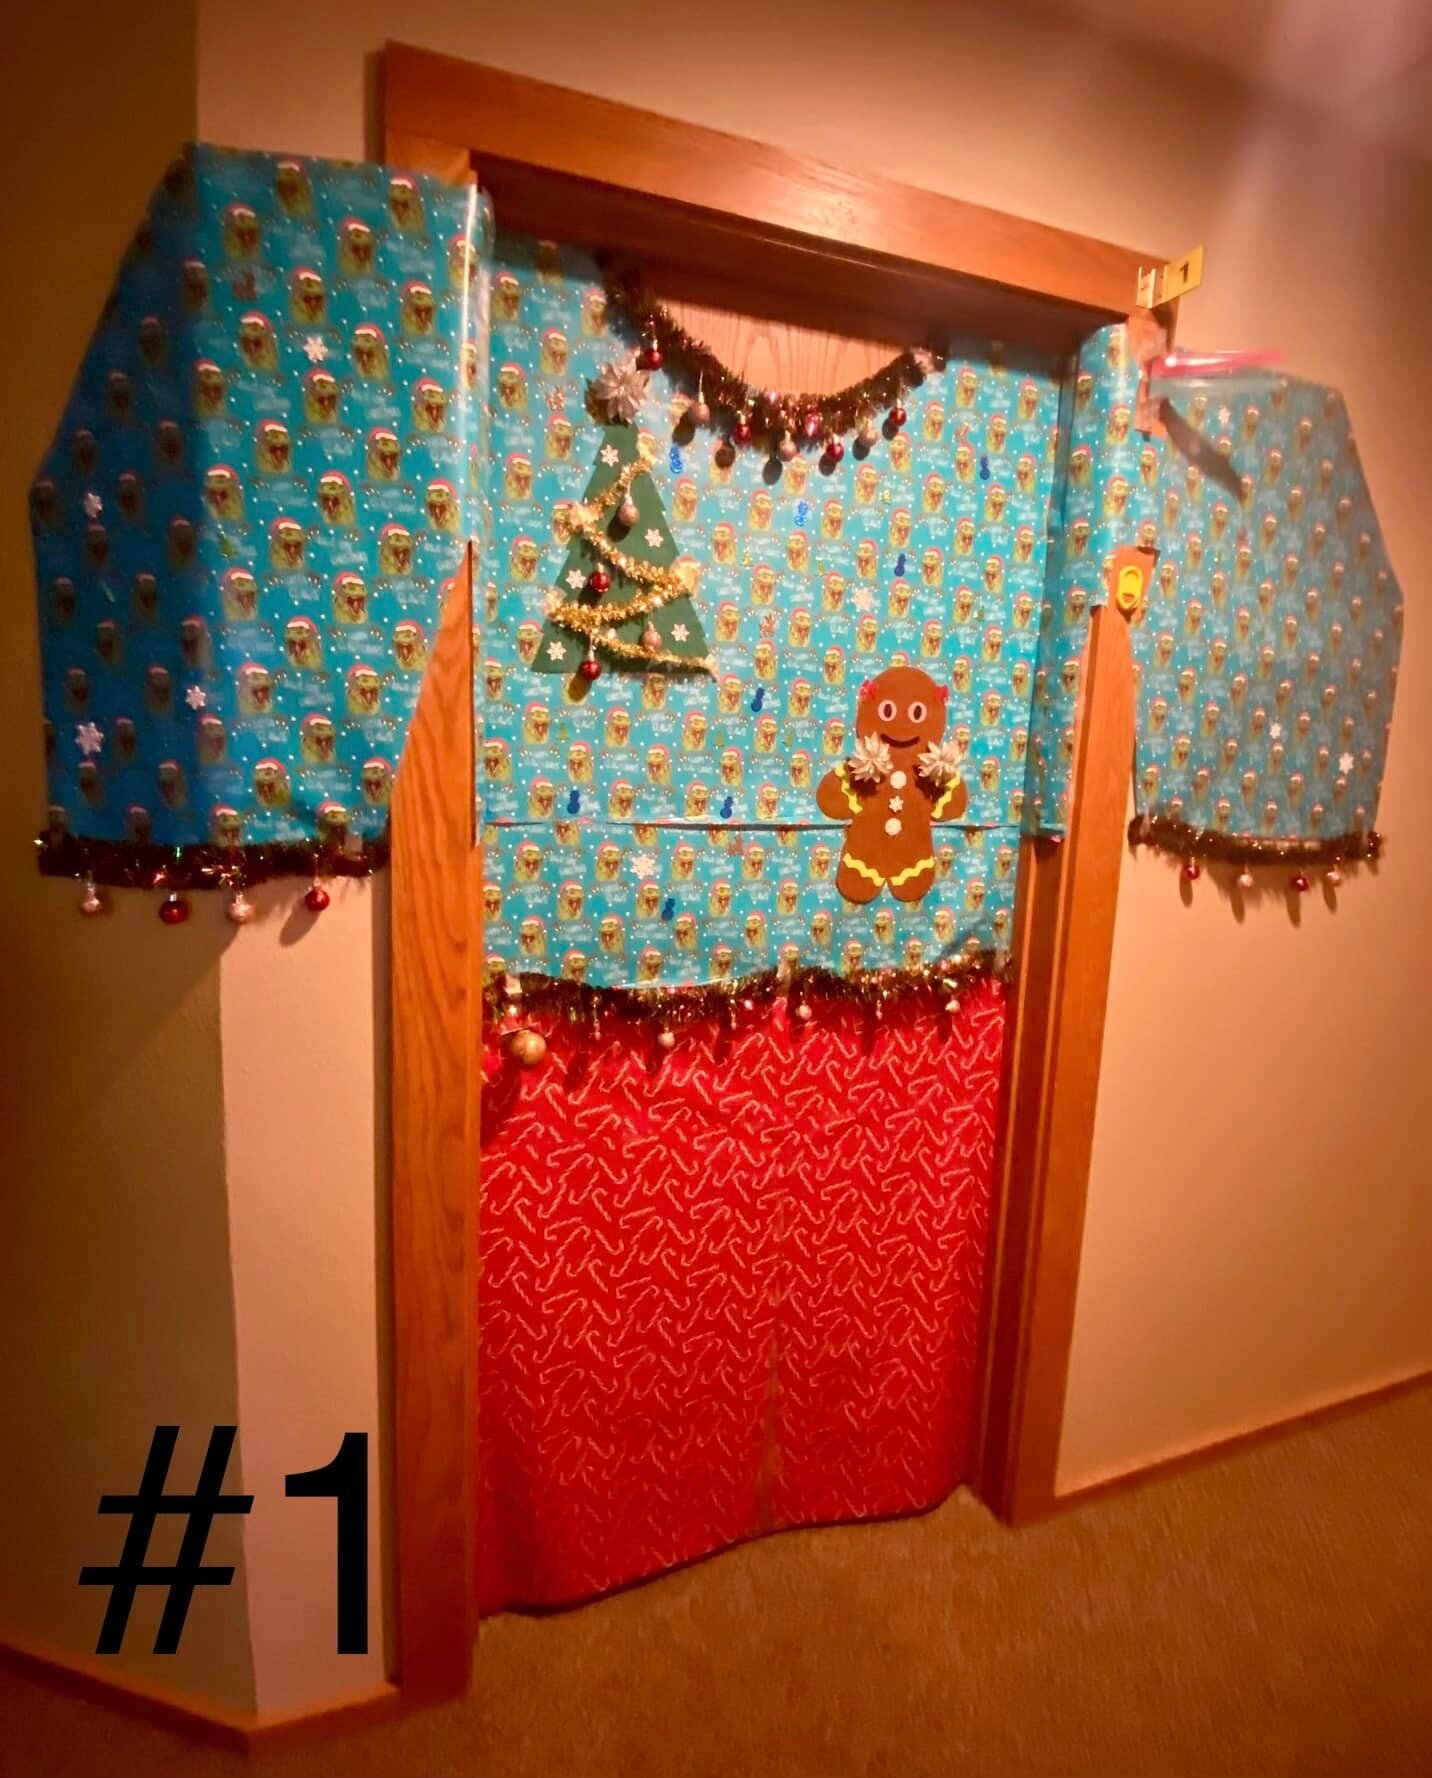 PSA: Vote in the comments. 
Your favorite chiropractic team has festively decorated the halls. Who did it best? 

Cast your vote today by commenting below with the picture number of your choice. The vote will continue through 12/31. The door decorato